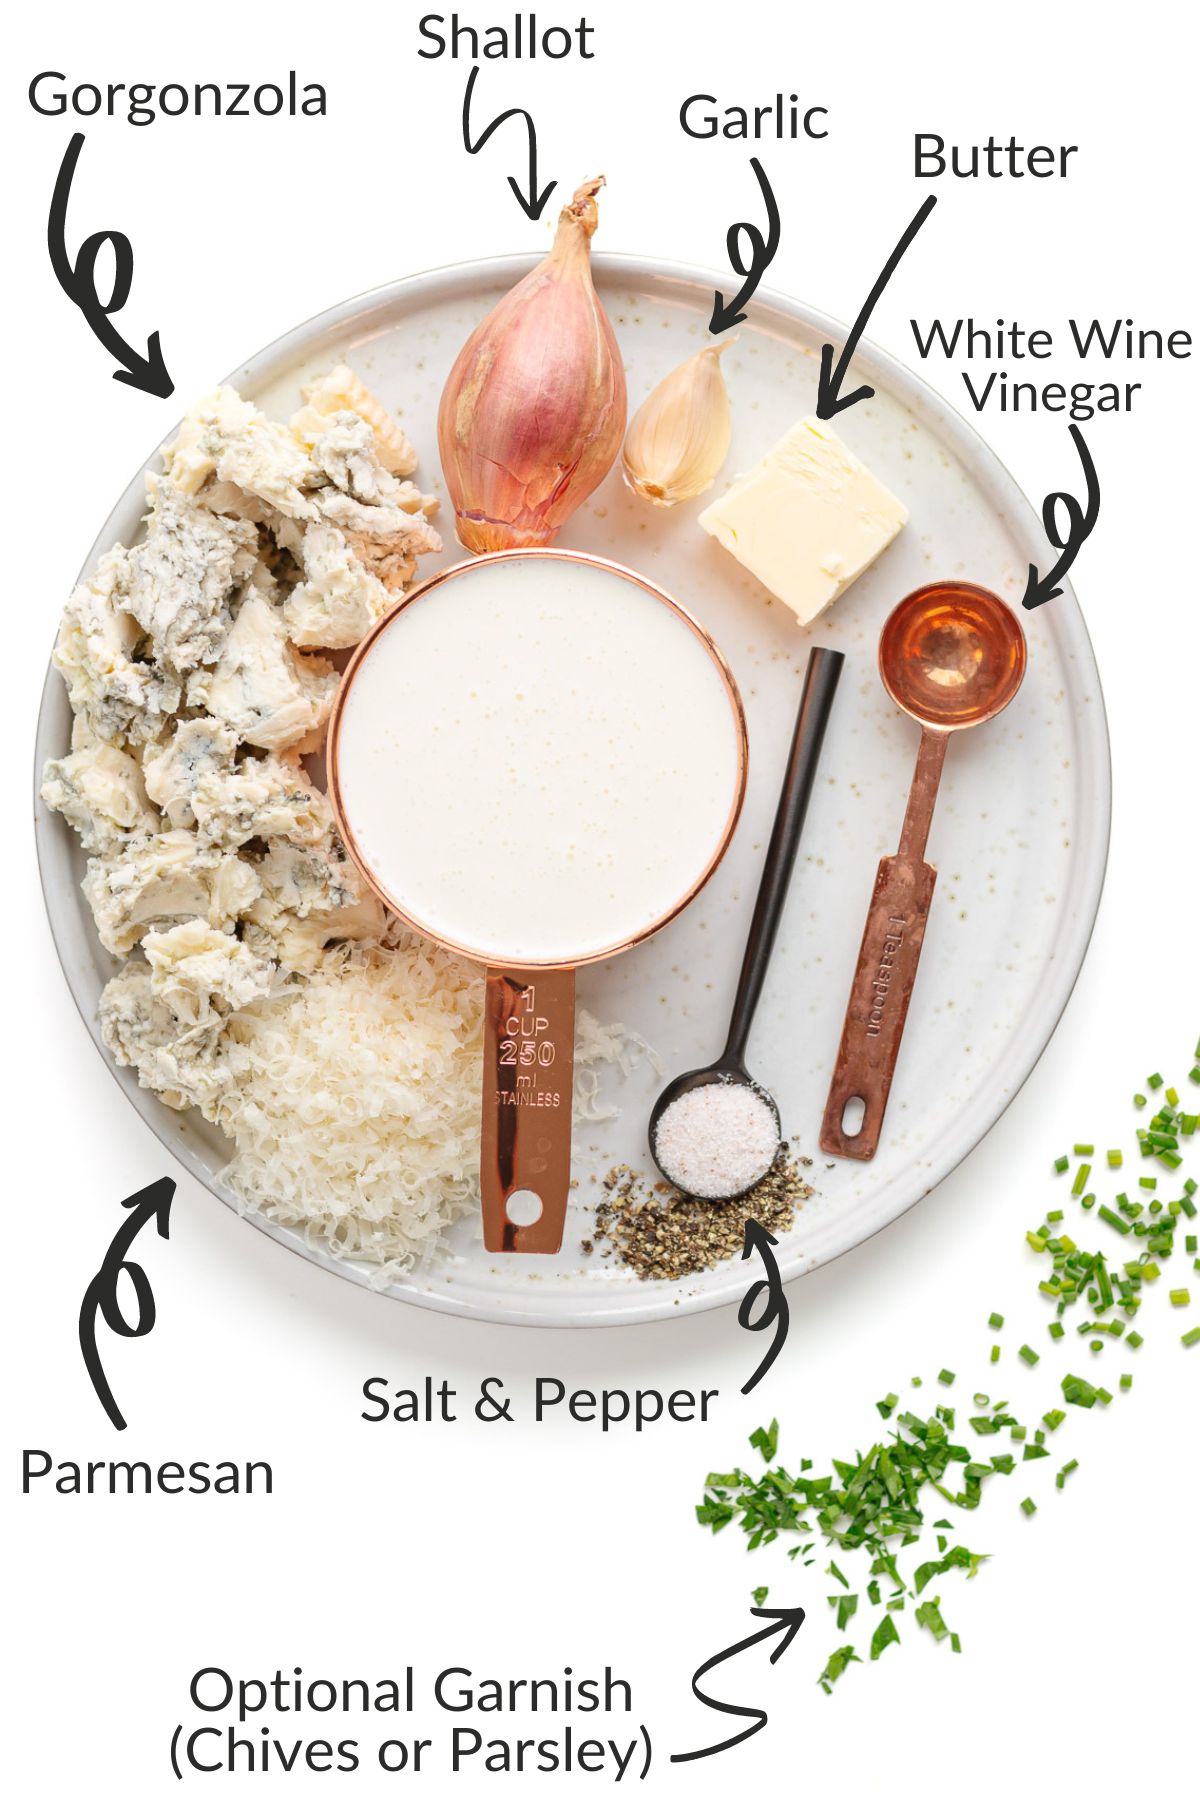 Labelled photo of ingredients needed to make gorgonzola sauce.